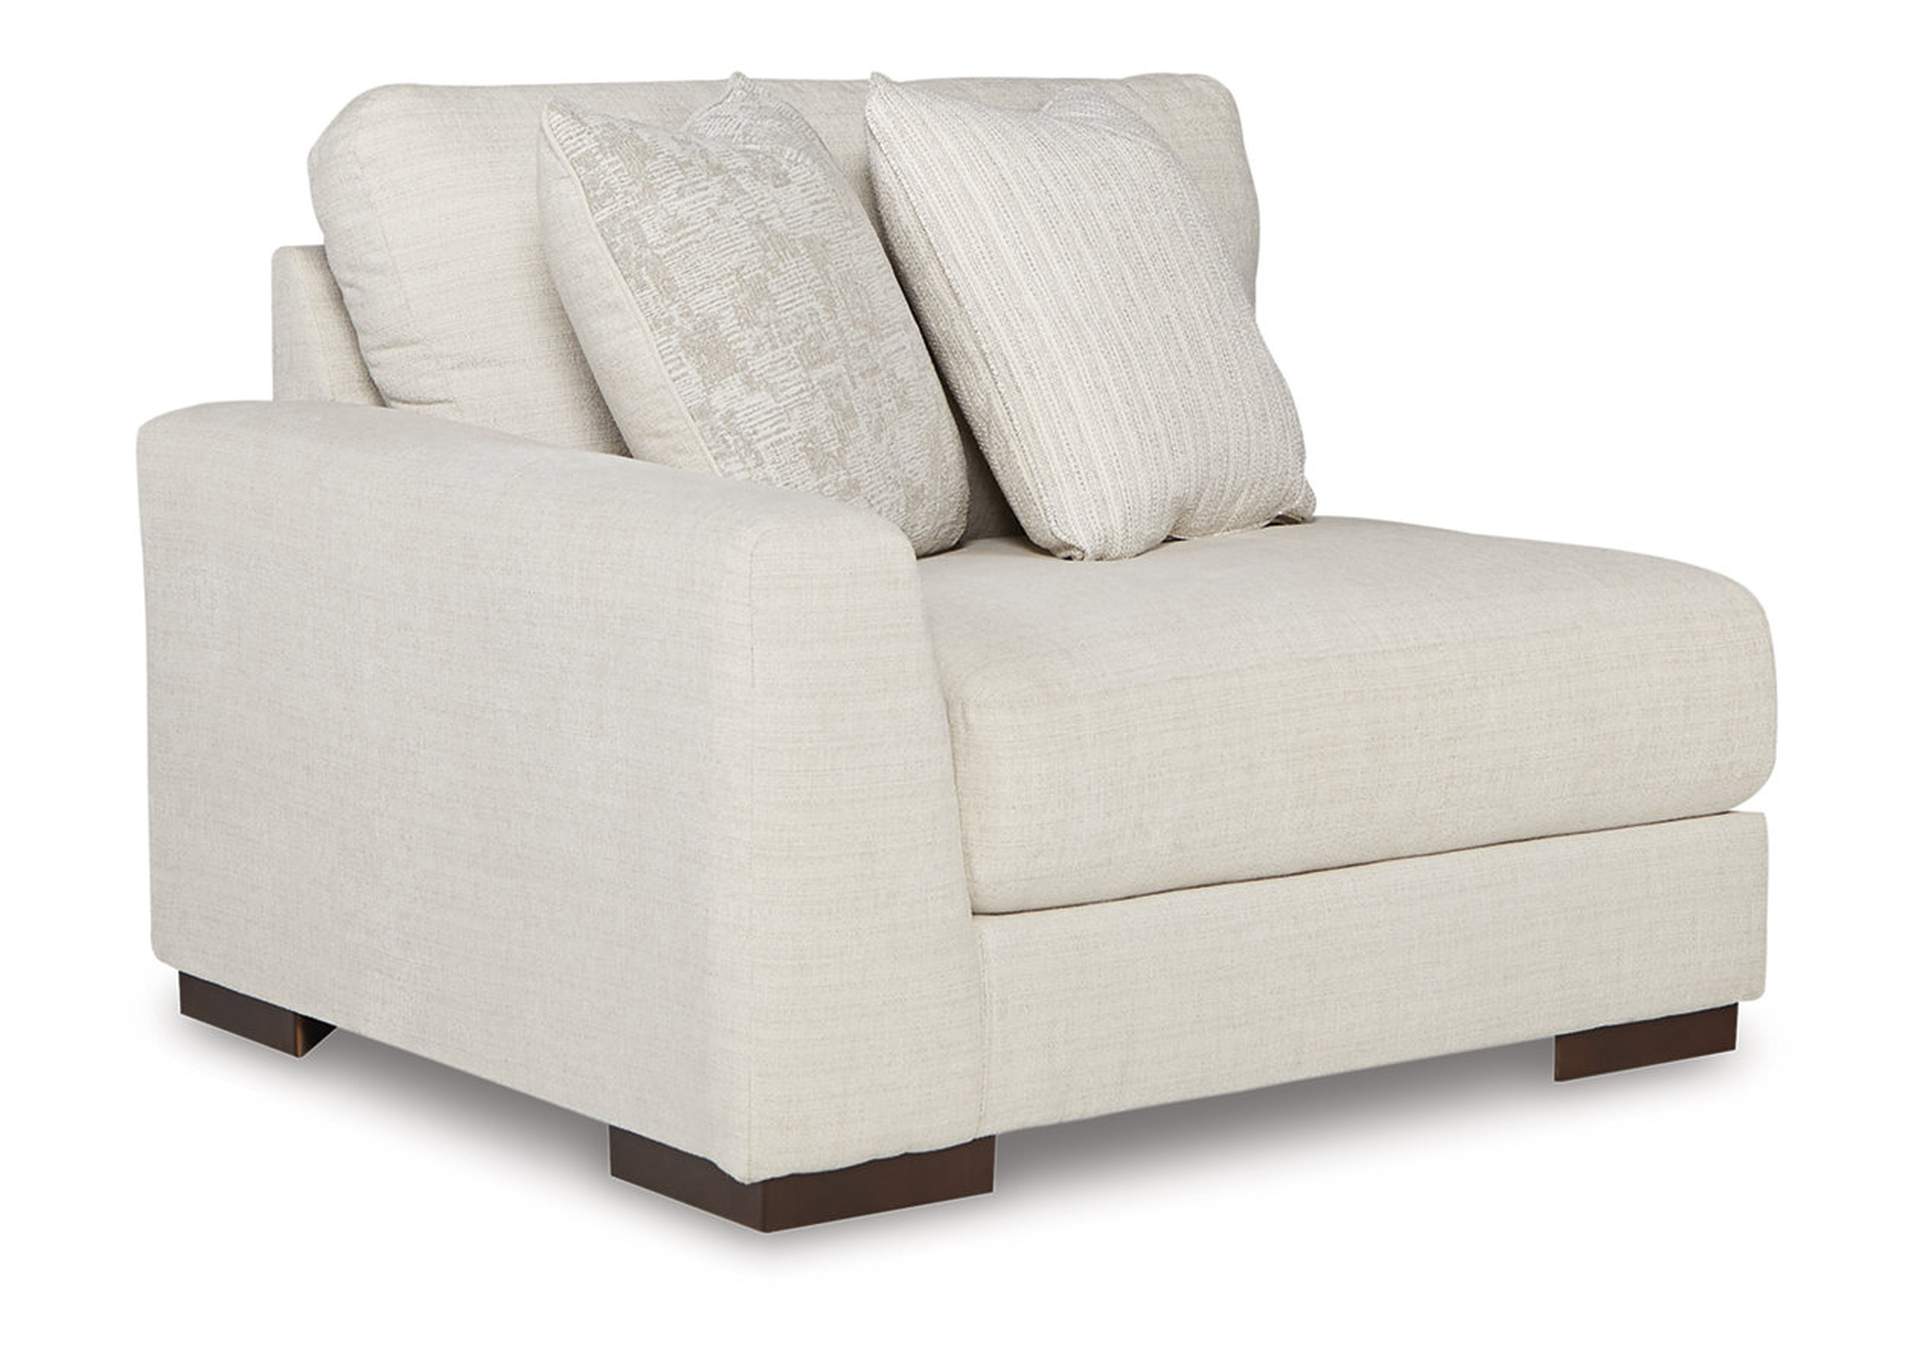 Lyndeboro 6-Piece Sectional with Ottoman,Ashley